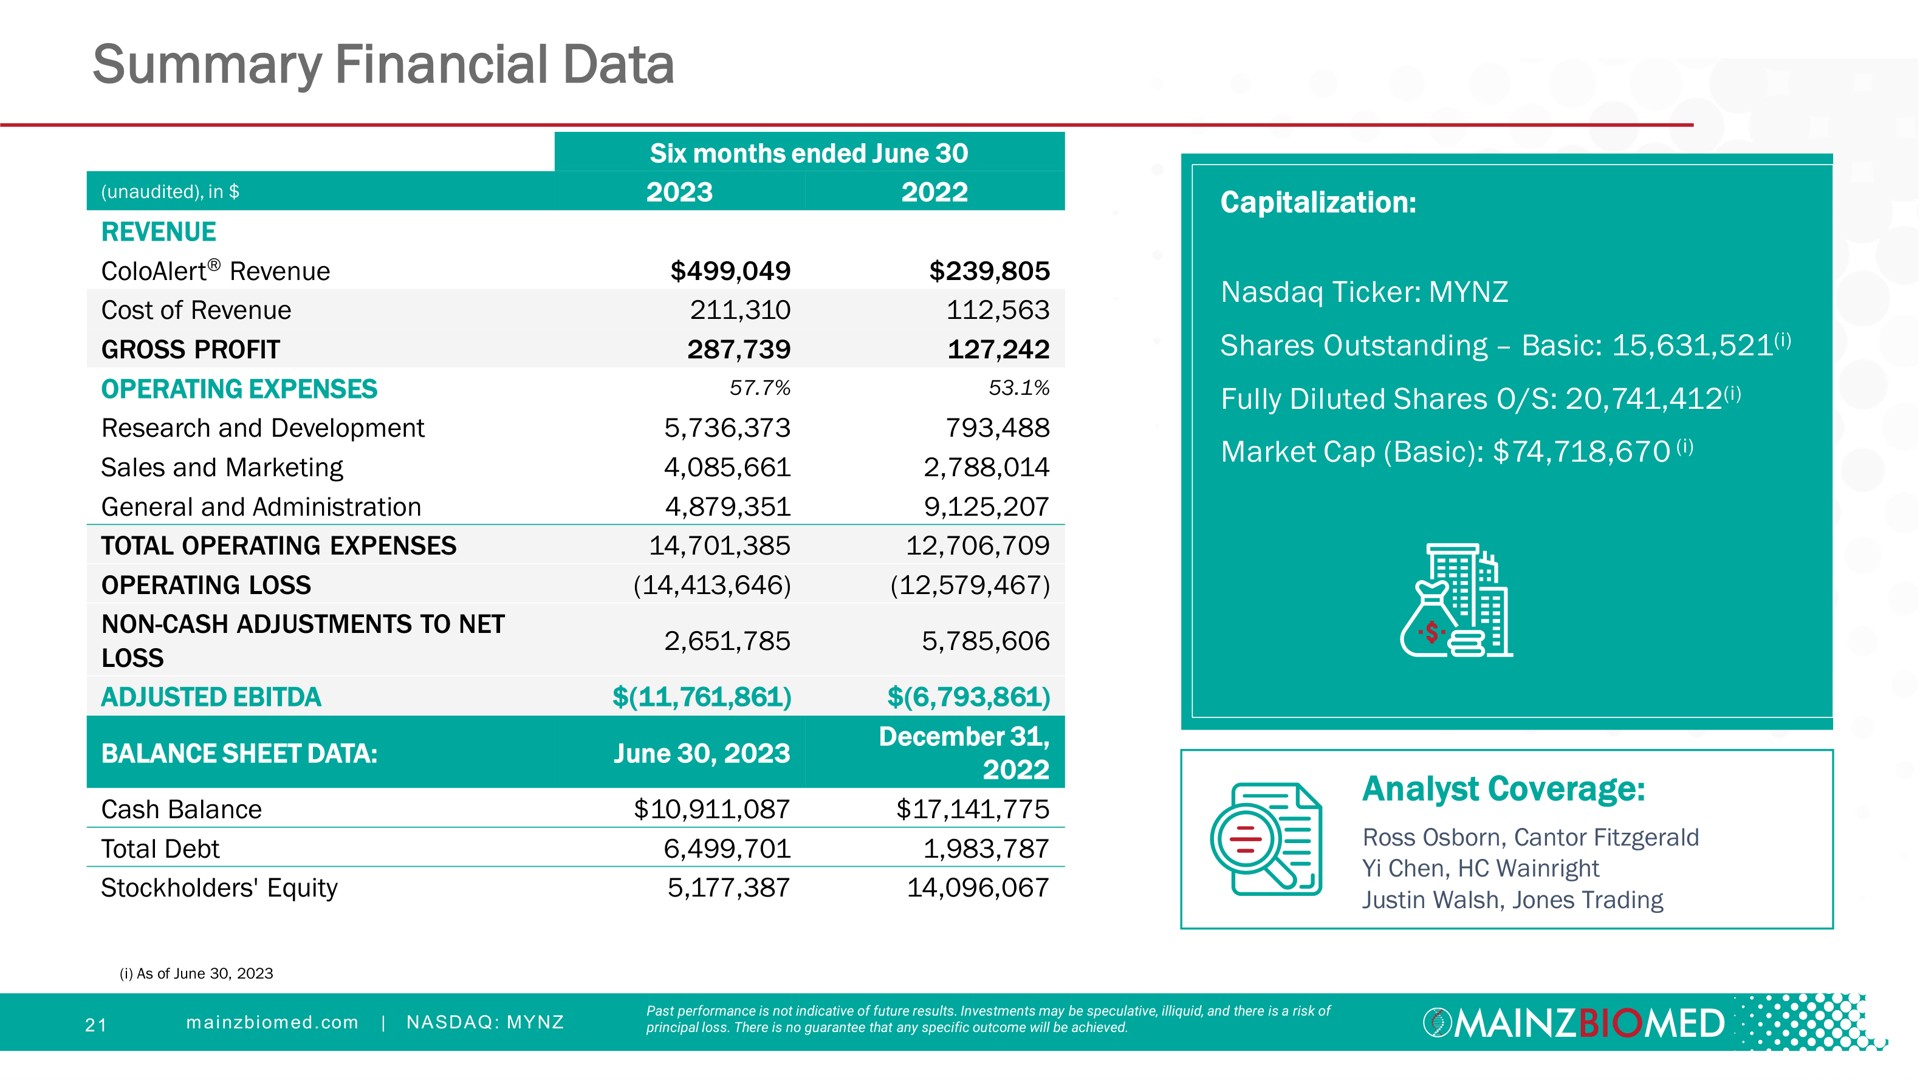 summary financial data sales and marketing on fully diluted shares as spheres | Mainz Biomed NV